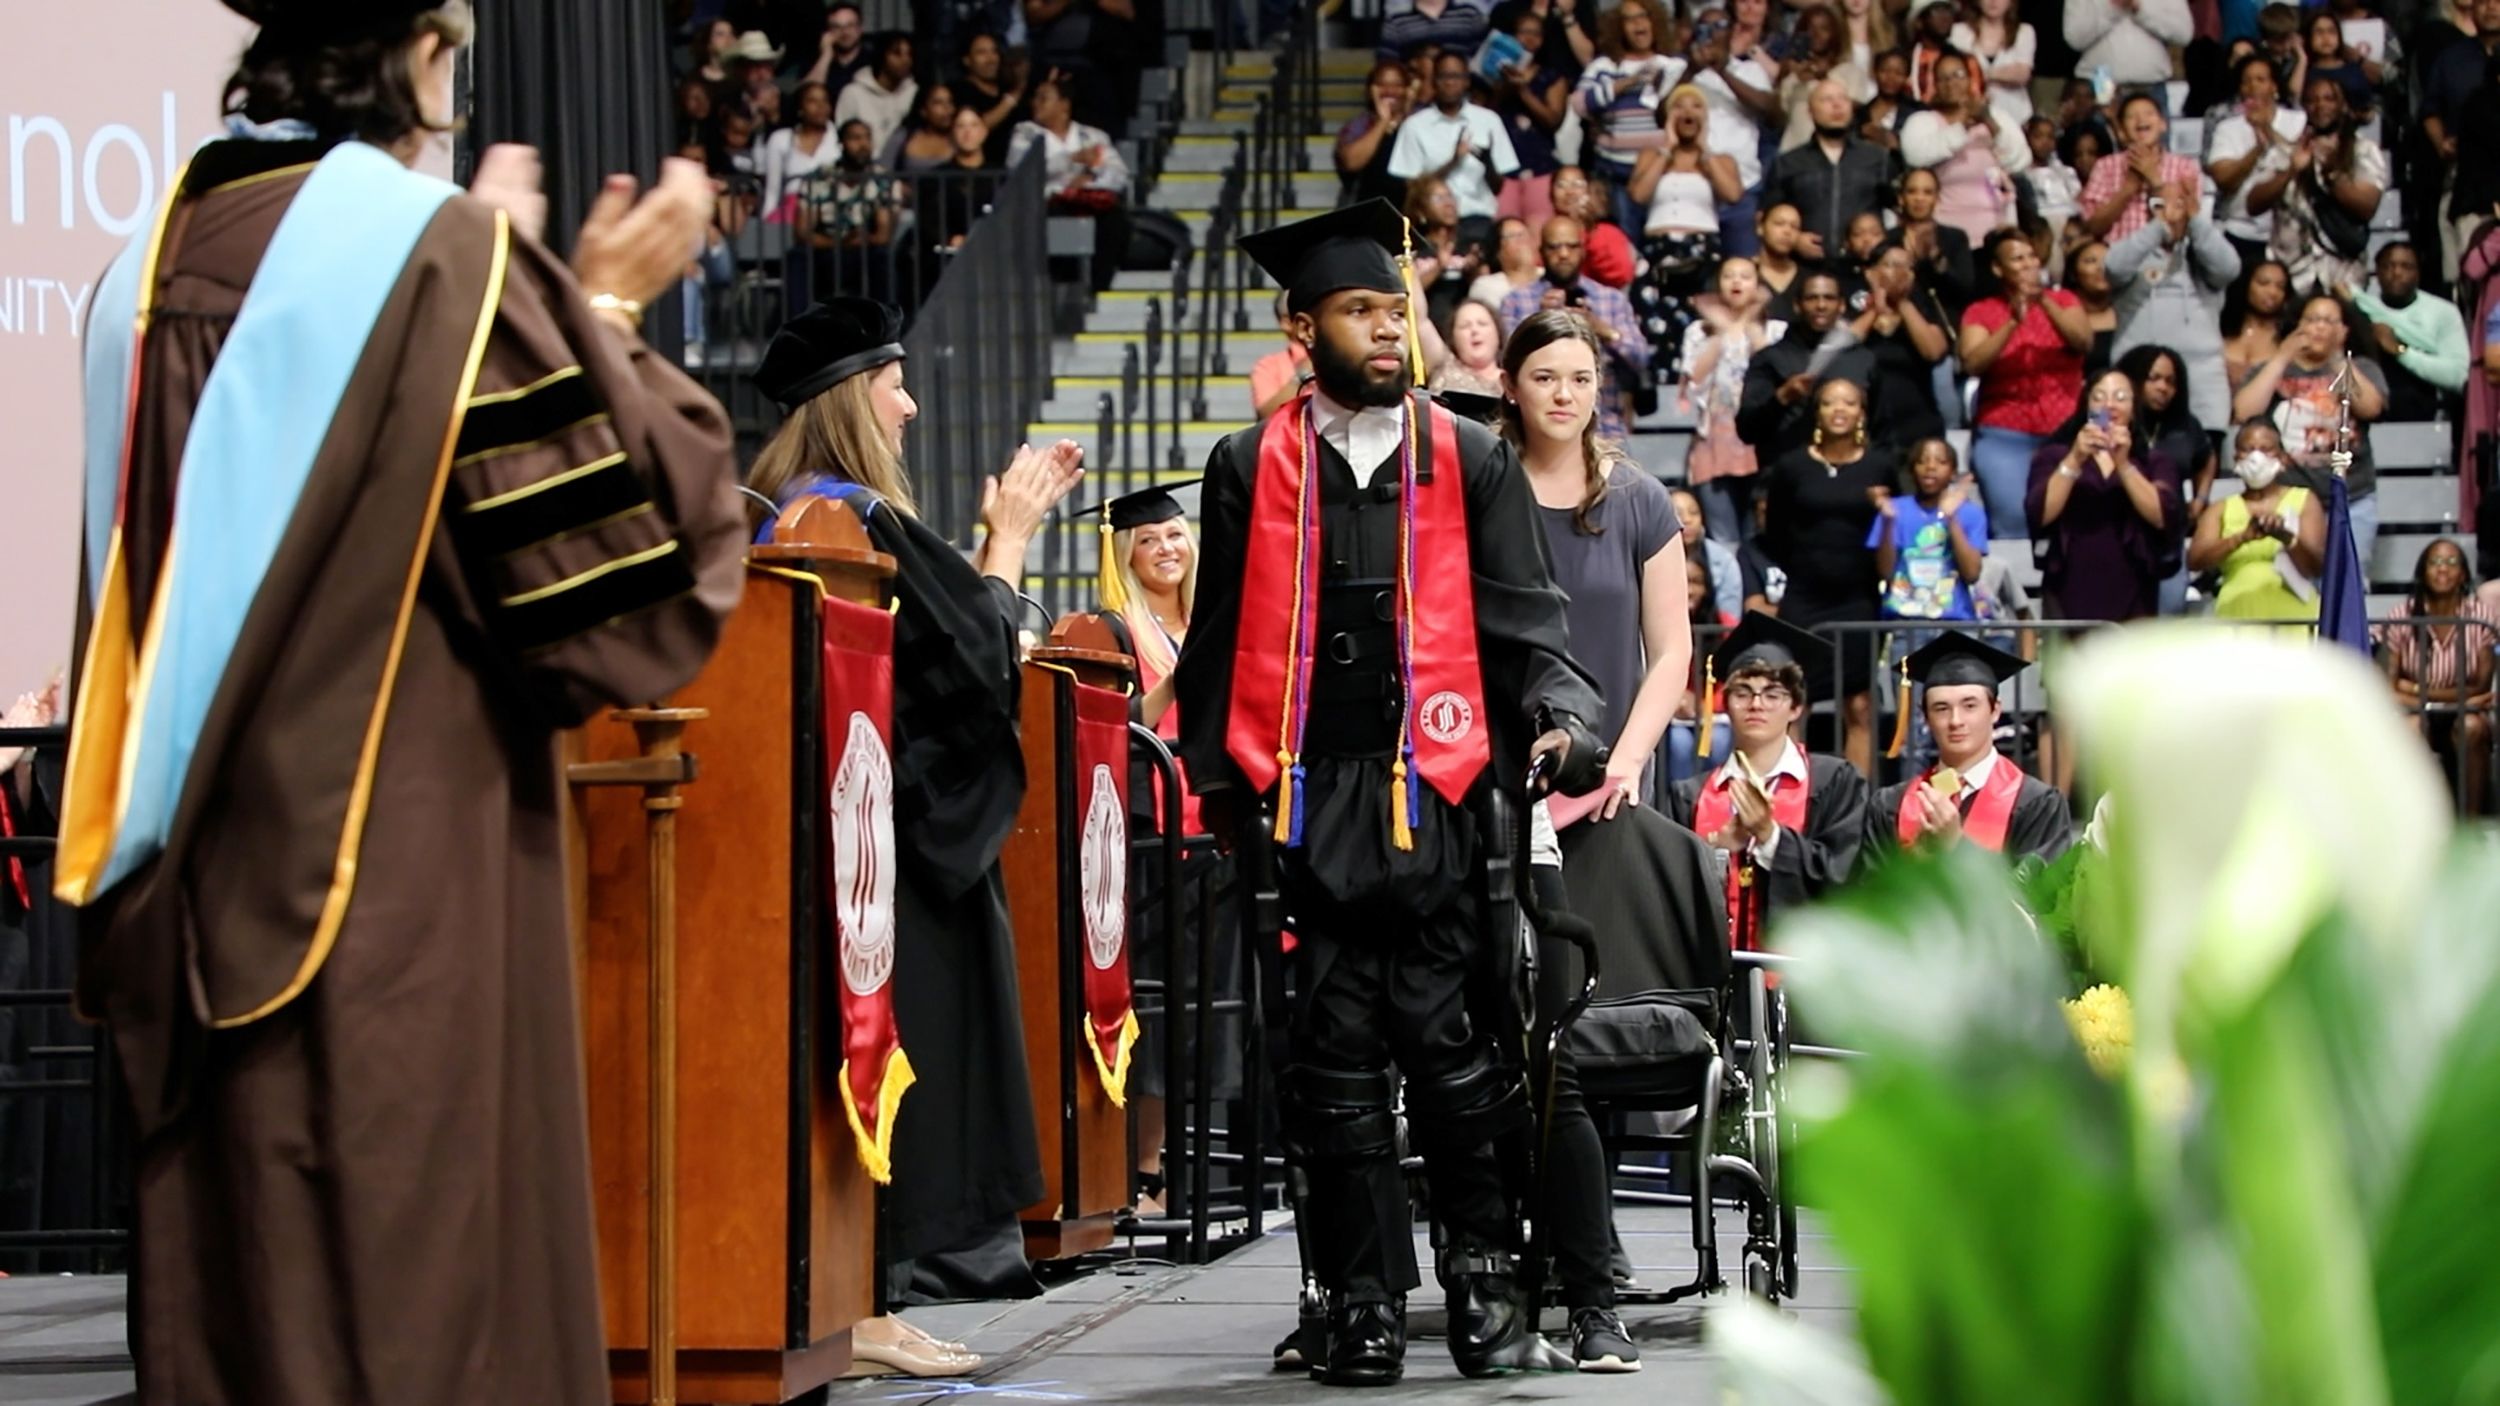 Khalil Watson uses an exoskeleton to stand and walk at his college graduation ceremony years after ...